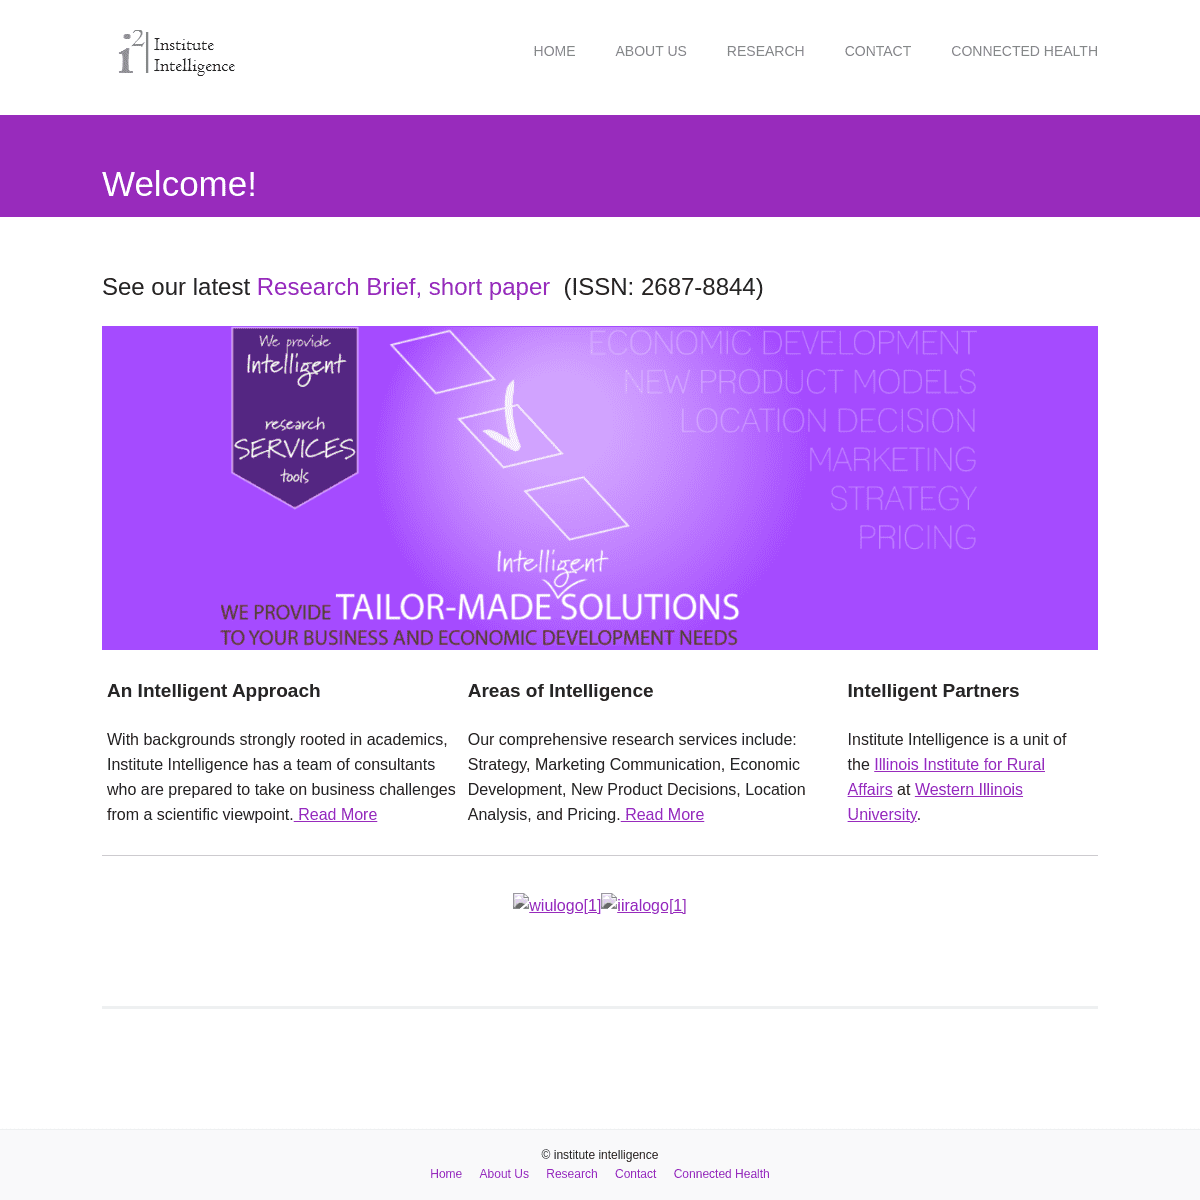 A complete backup of https://instituteintelligence.com